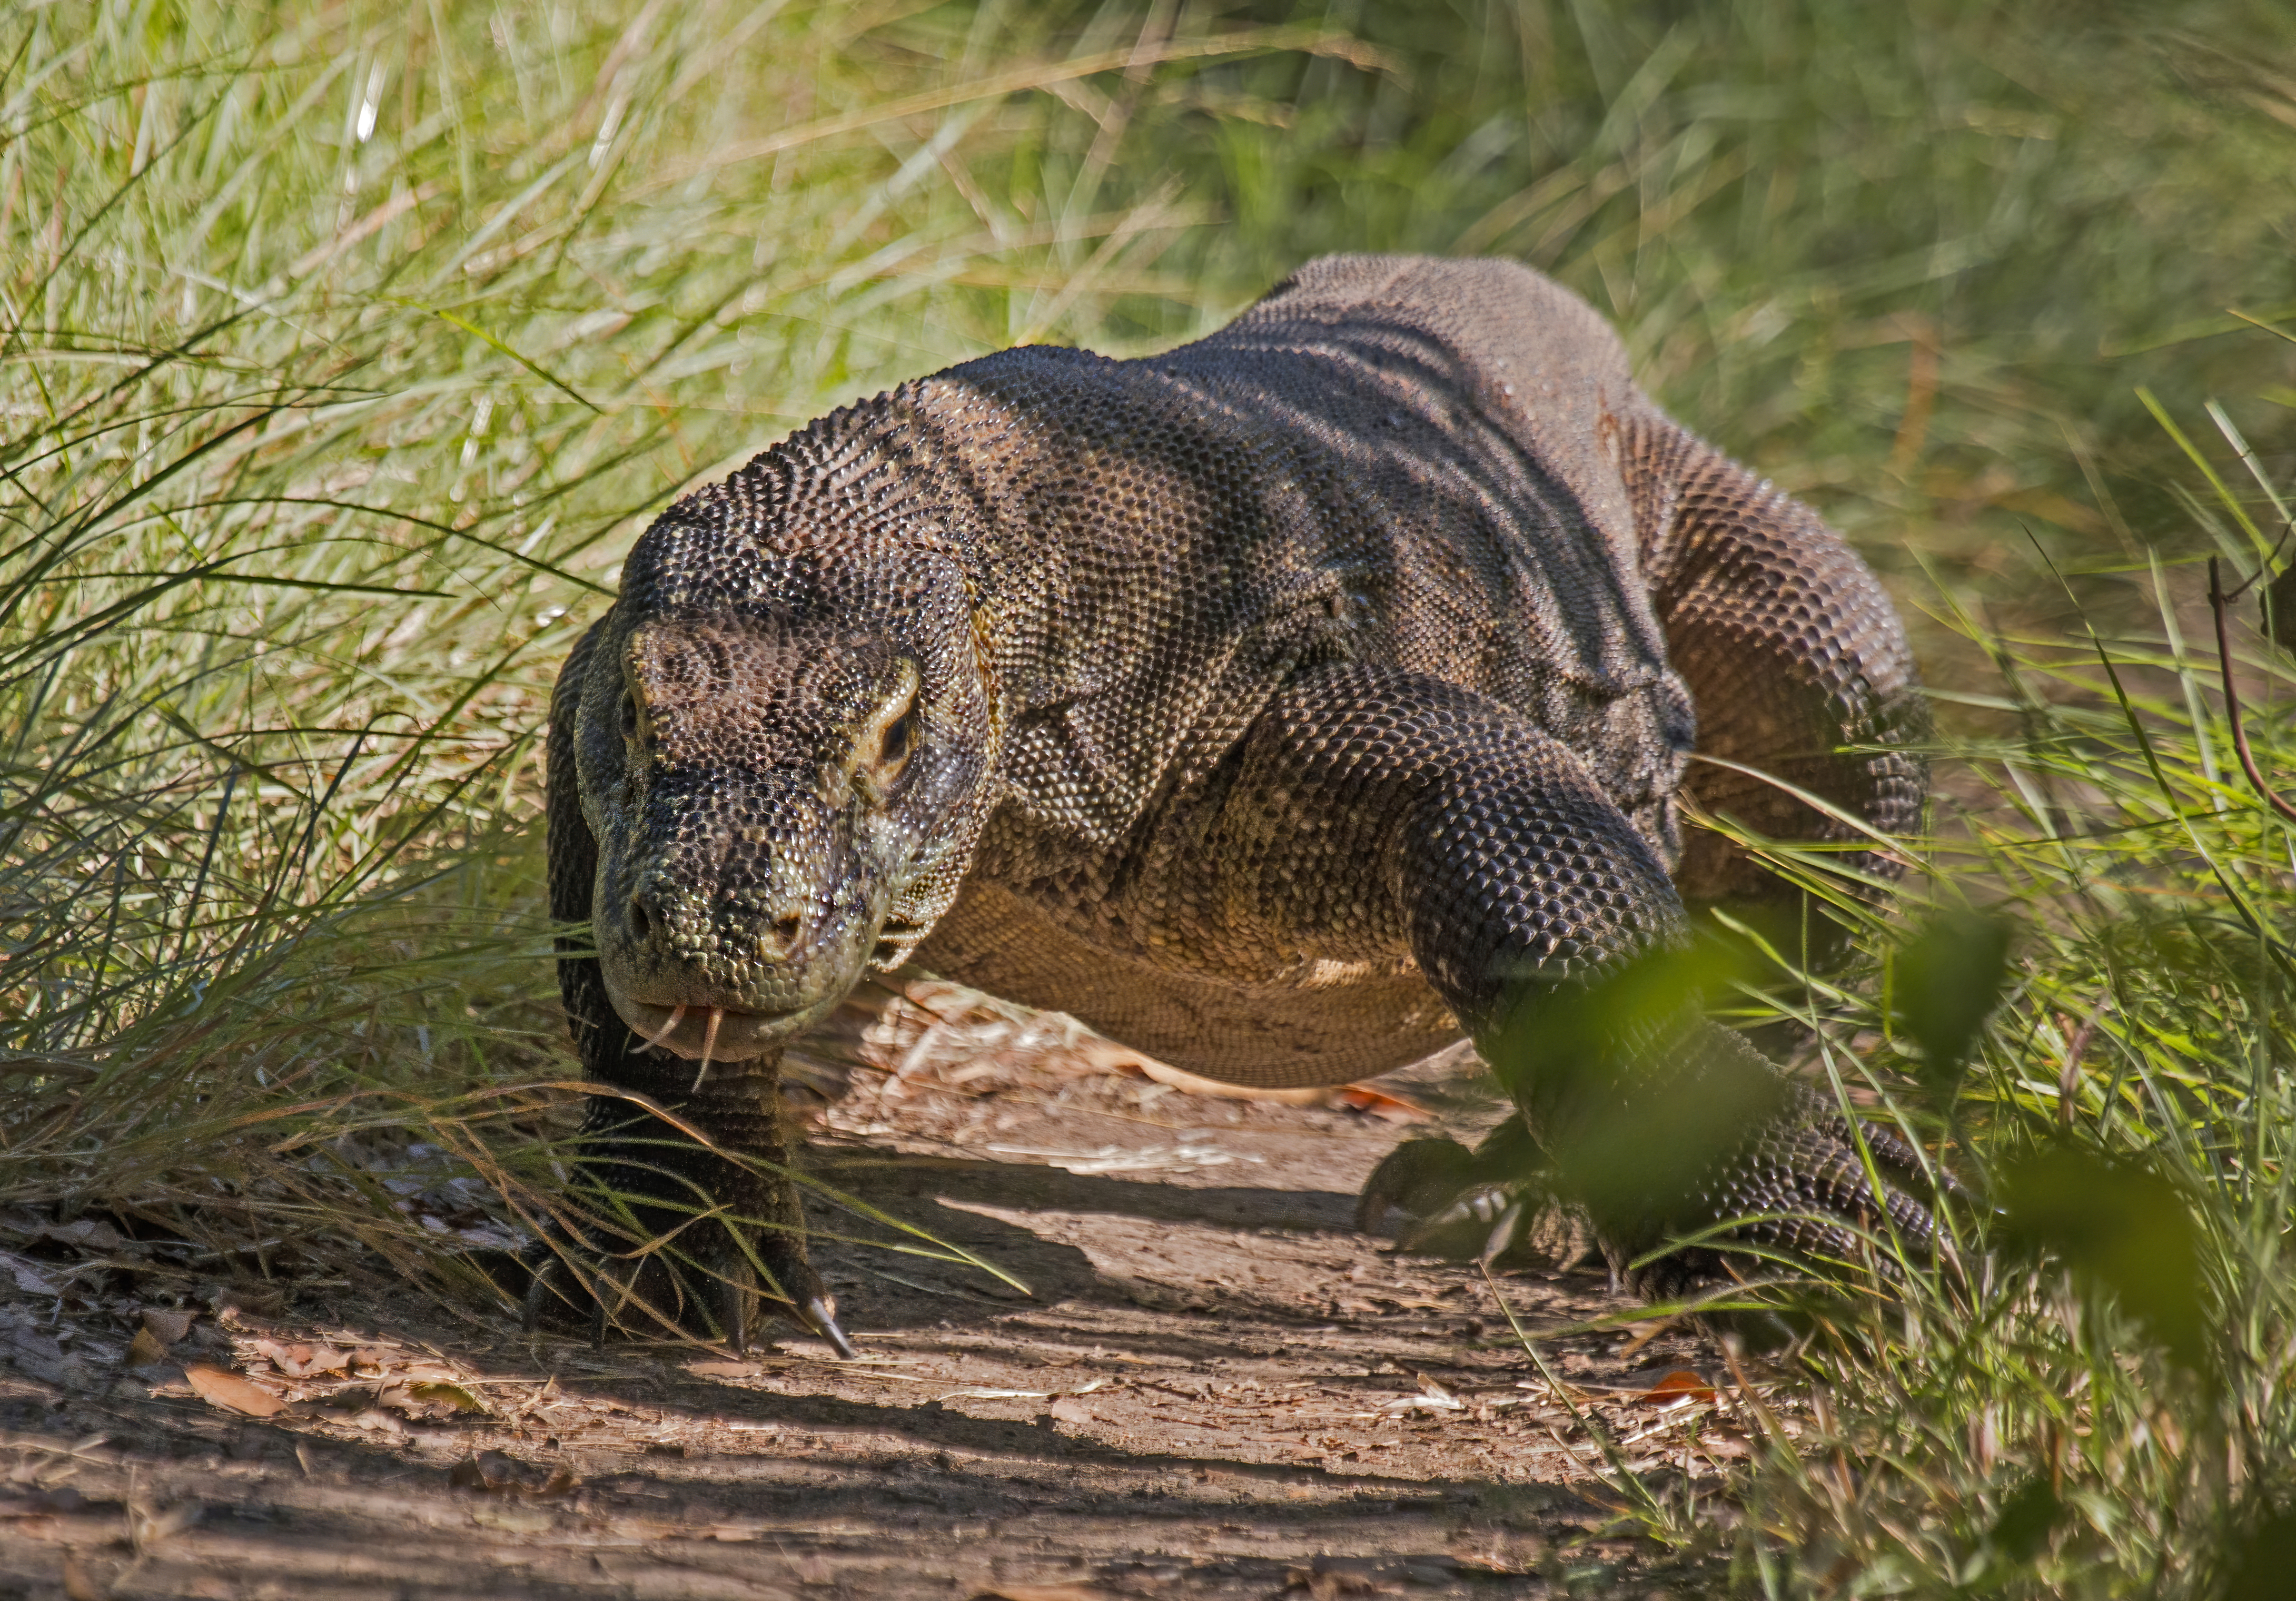 What family is the Komodo dragon in?